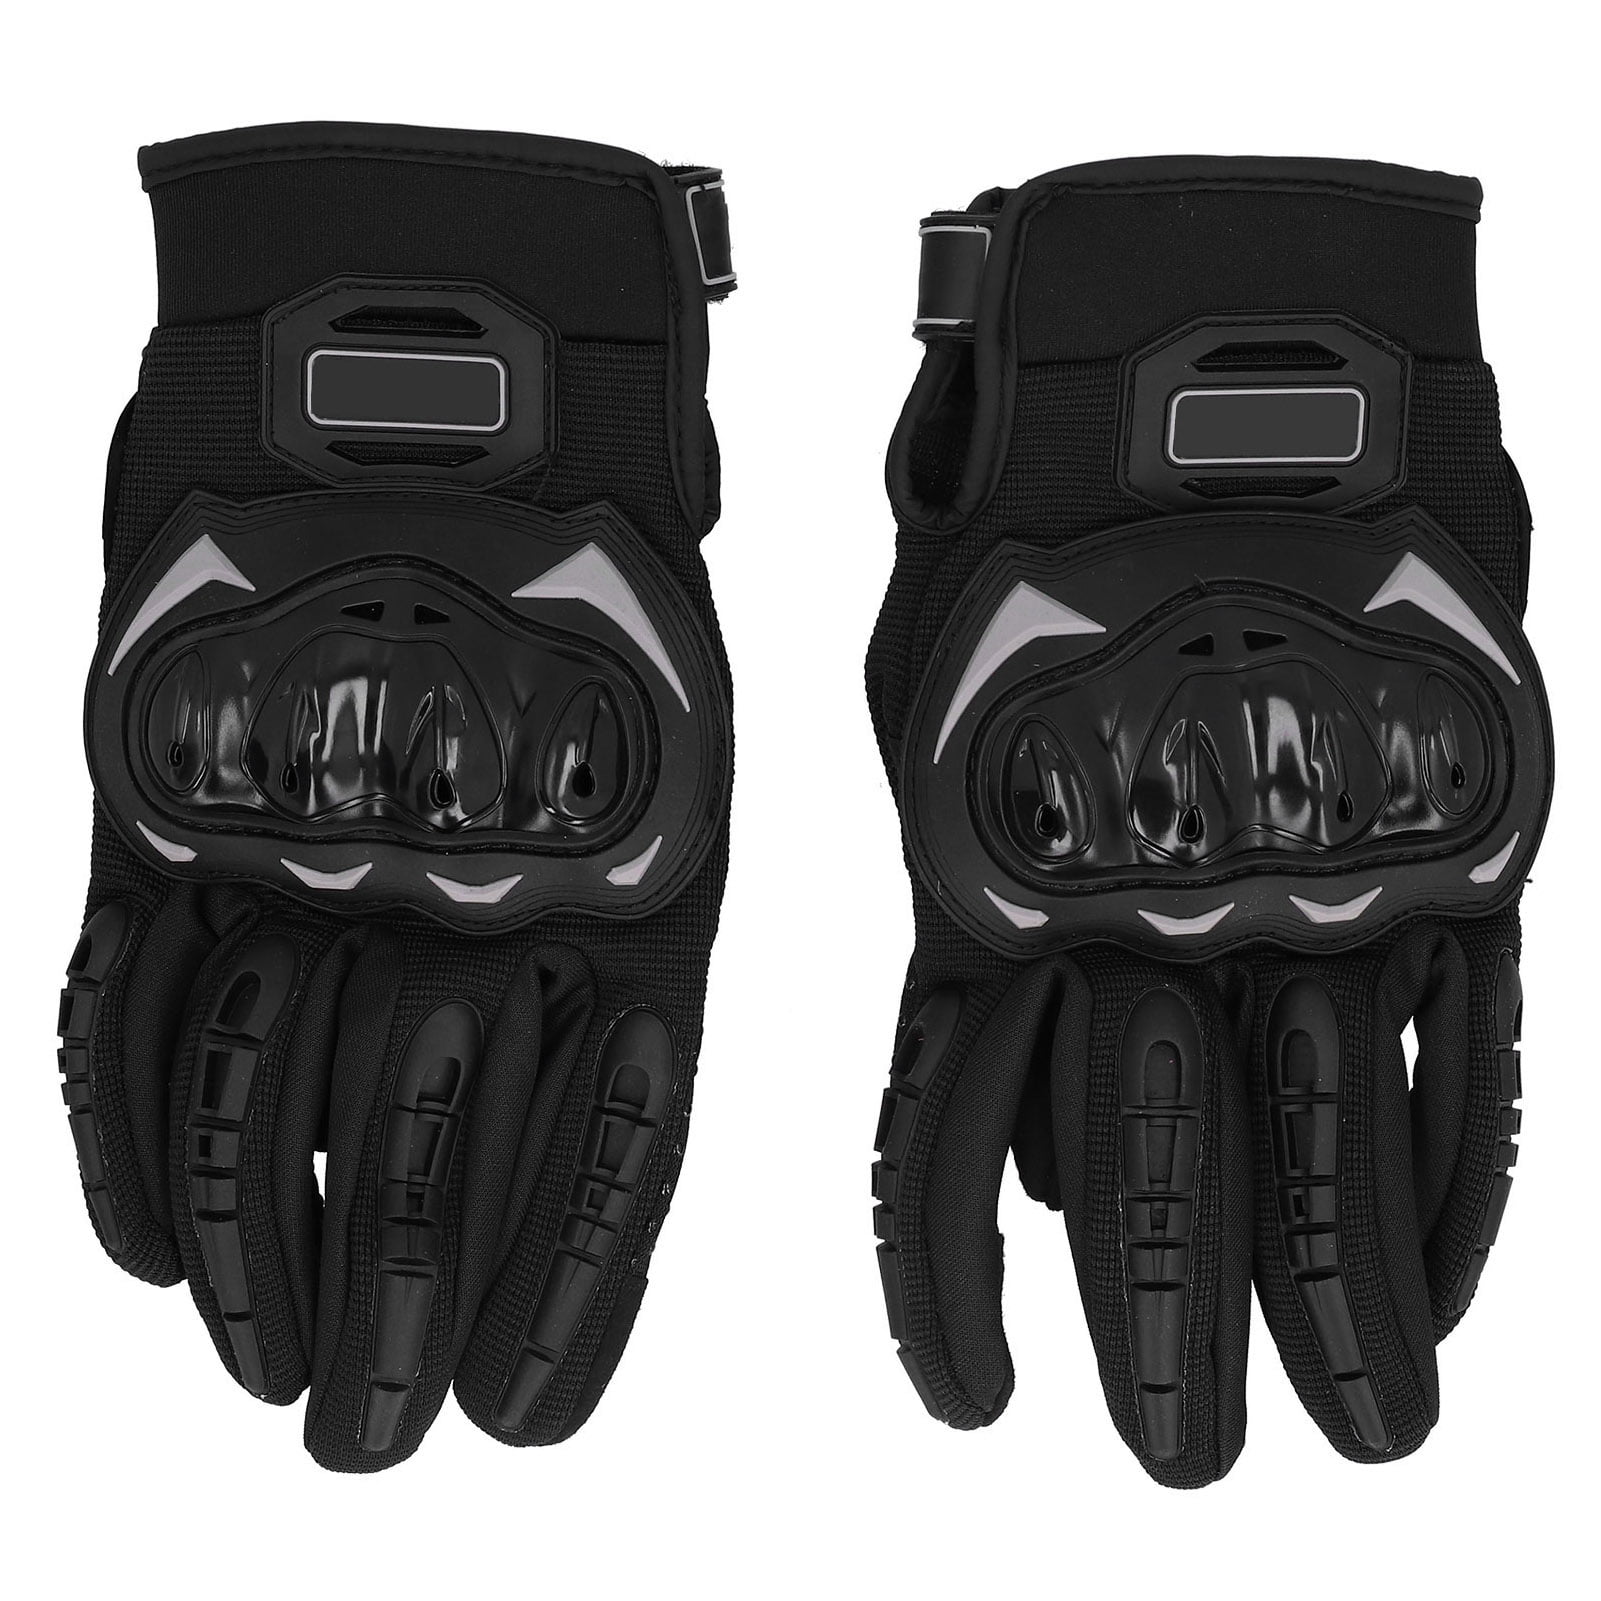 2X Winter Protection Motorcycle Hand Grip Gloves Handlebar Muffs Black Leather 